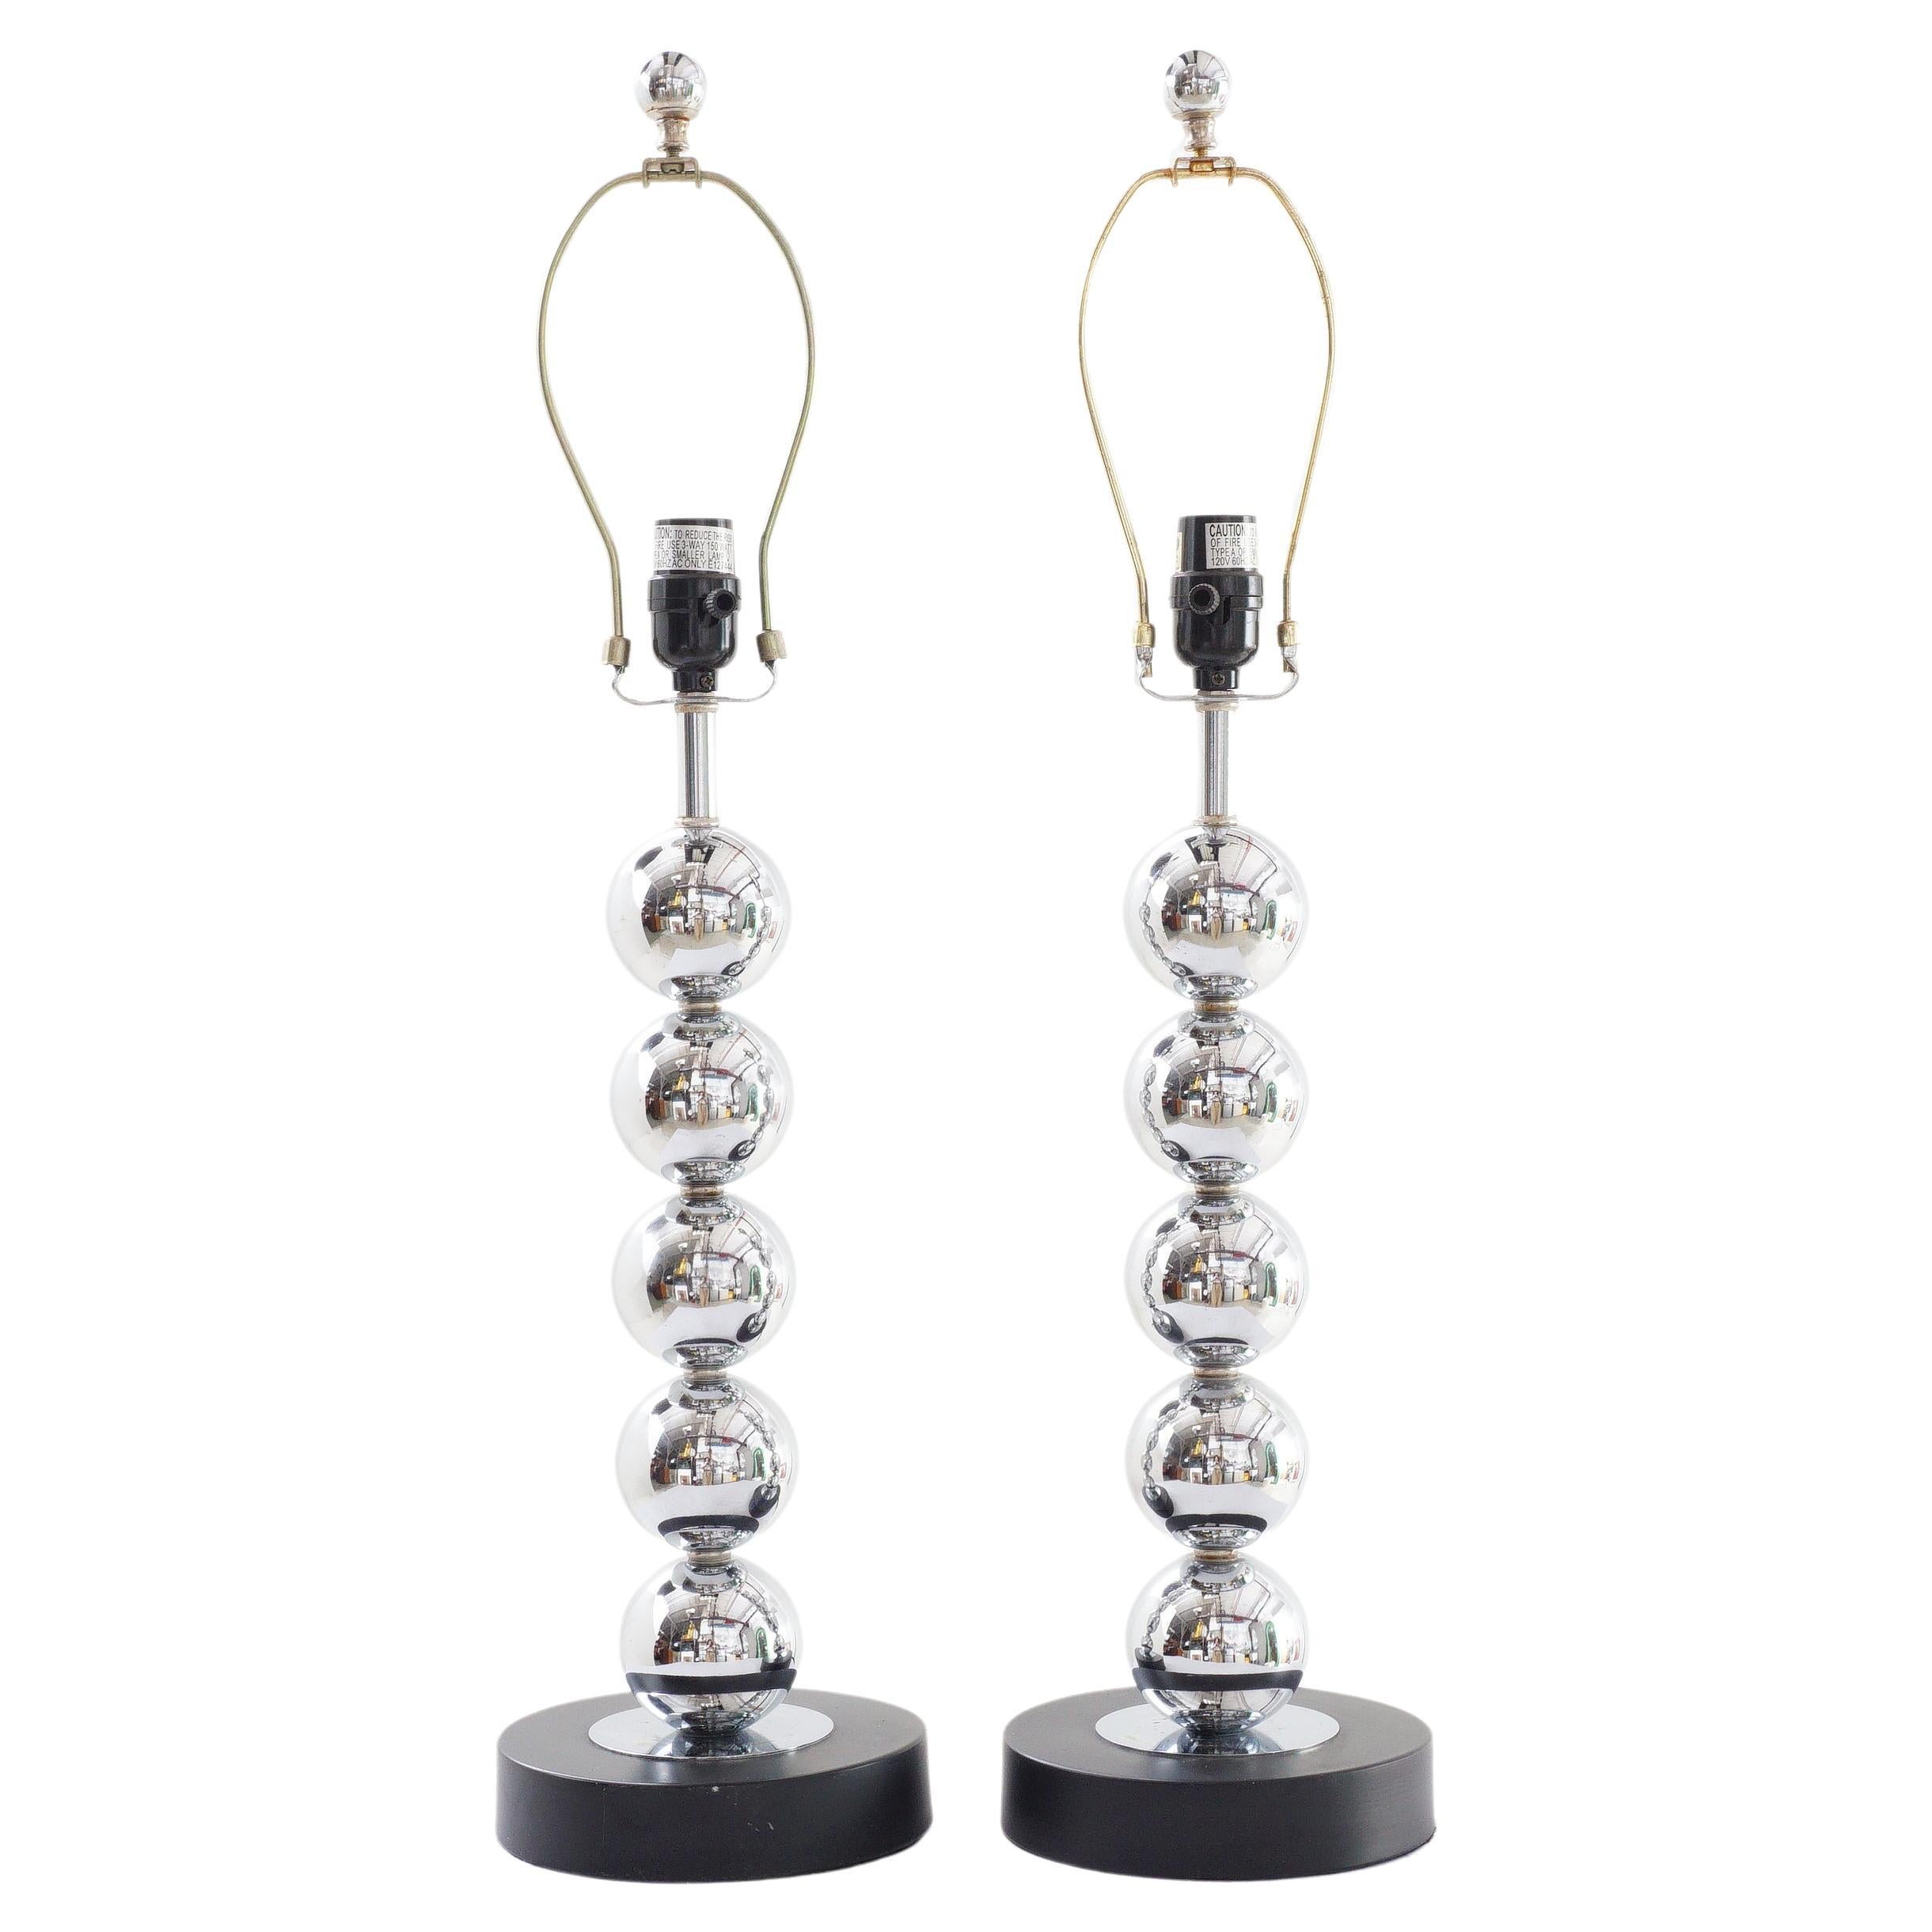 Pair of Stacked Sphere Lamps, 1970s For Sale